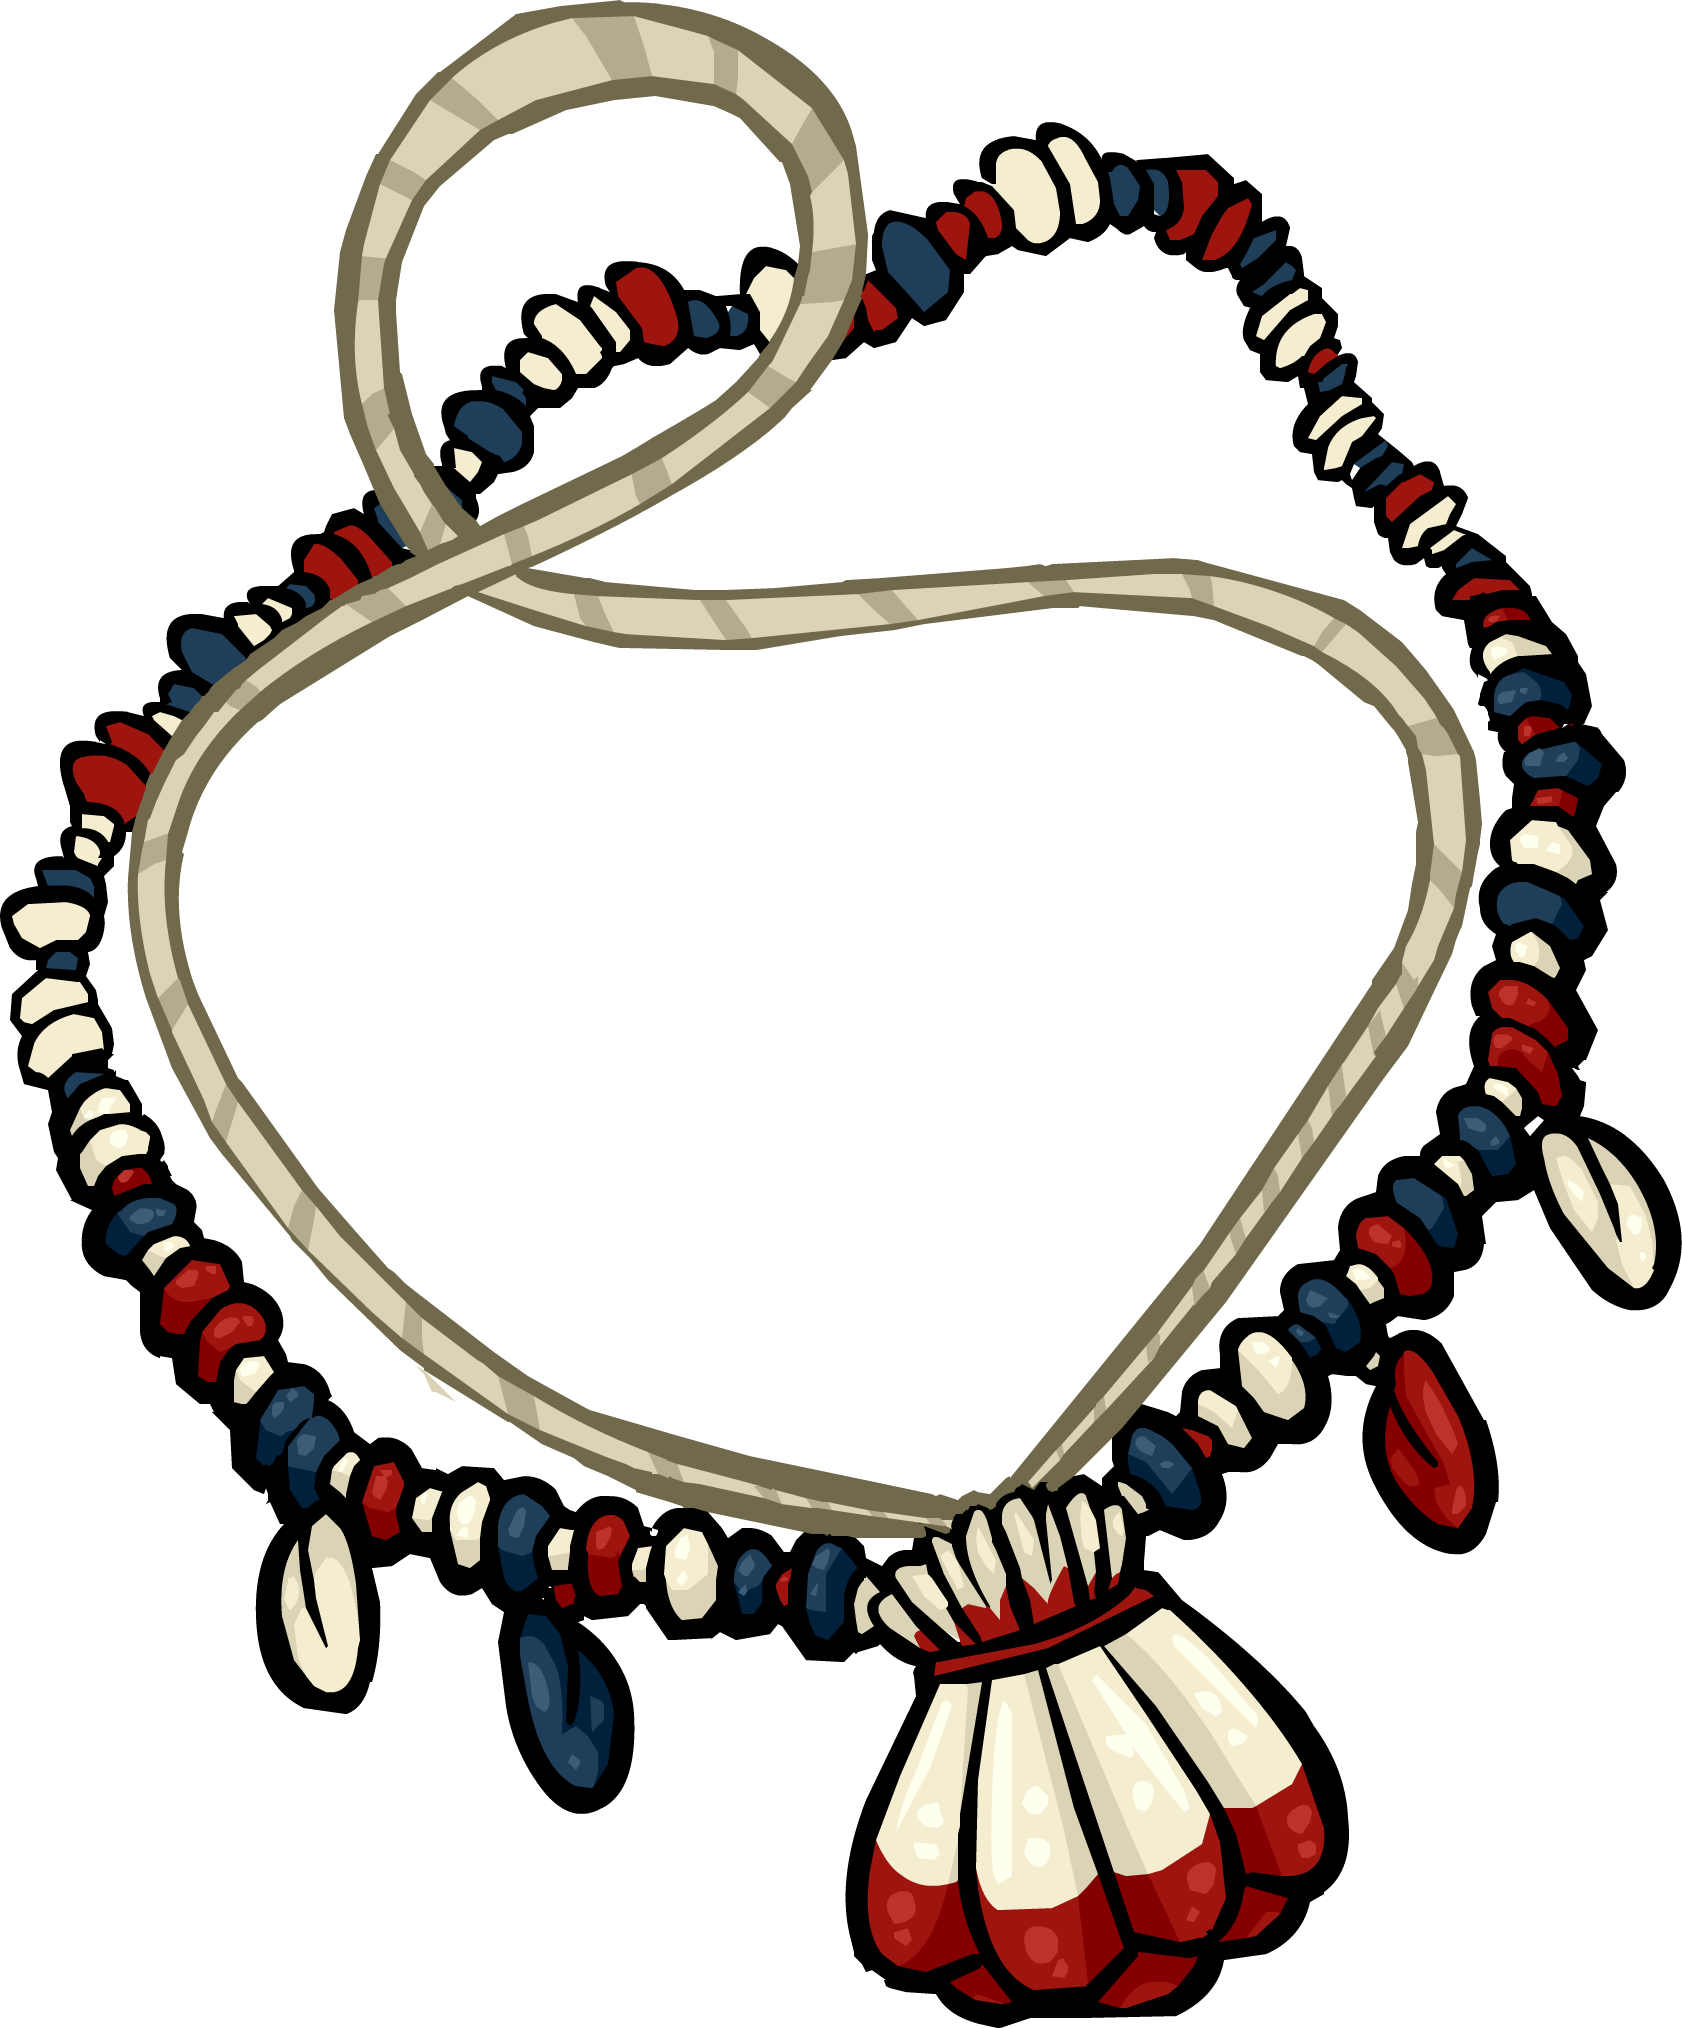 Necklace clipart closed neck. Club penguin shell jewelry